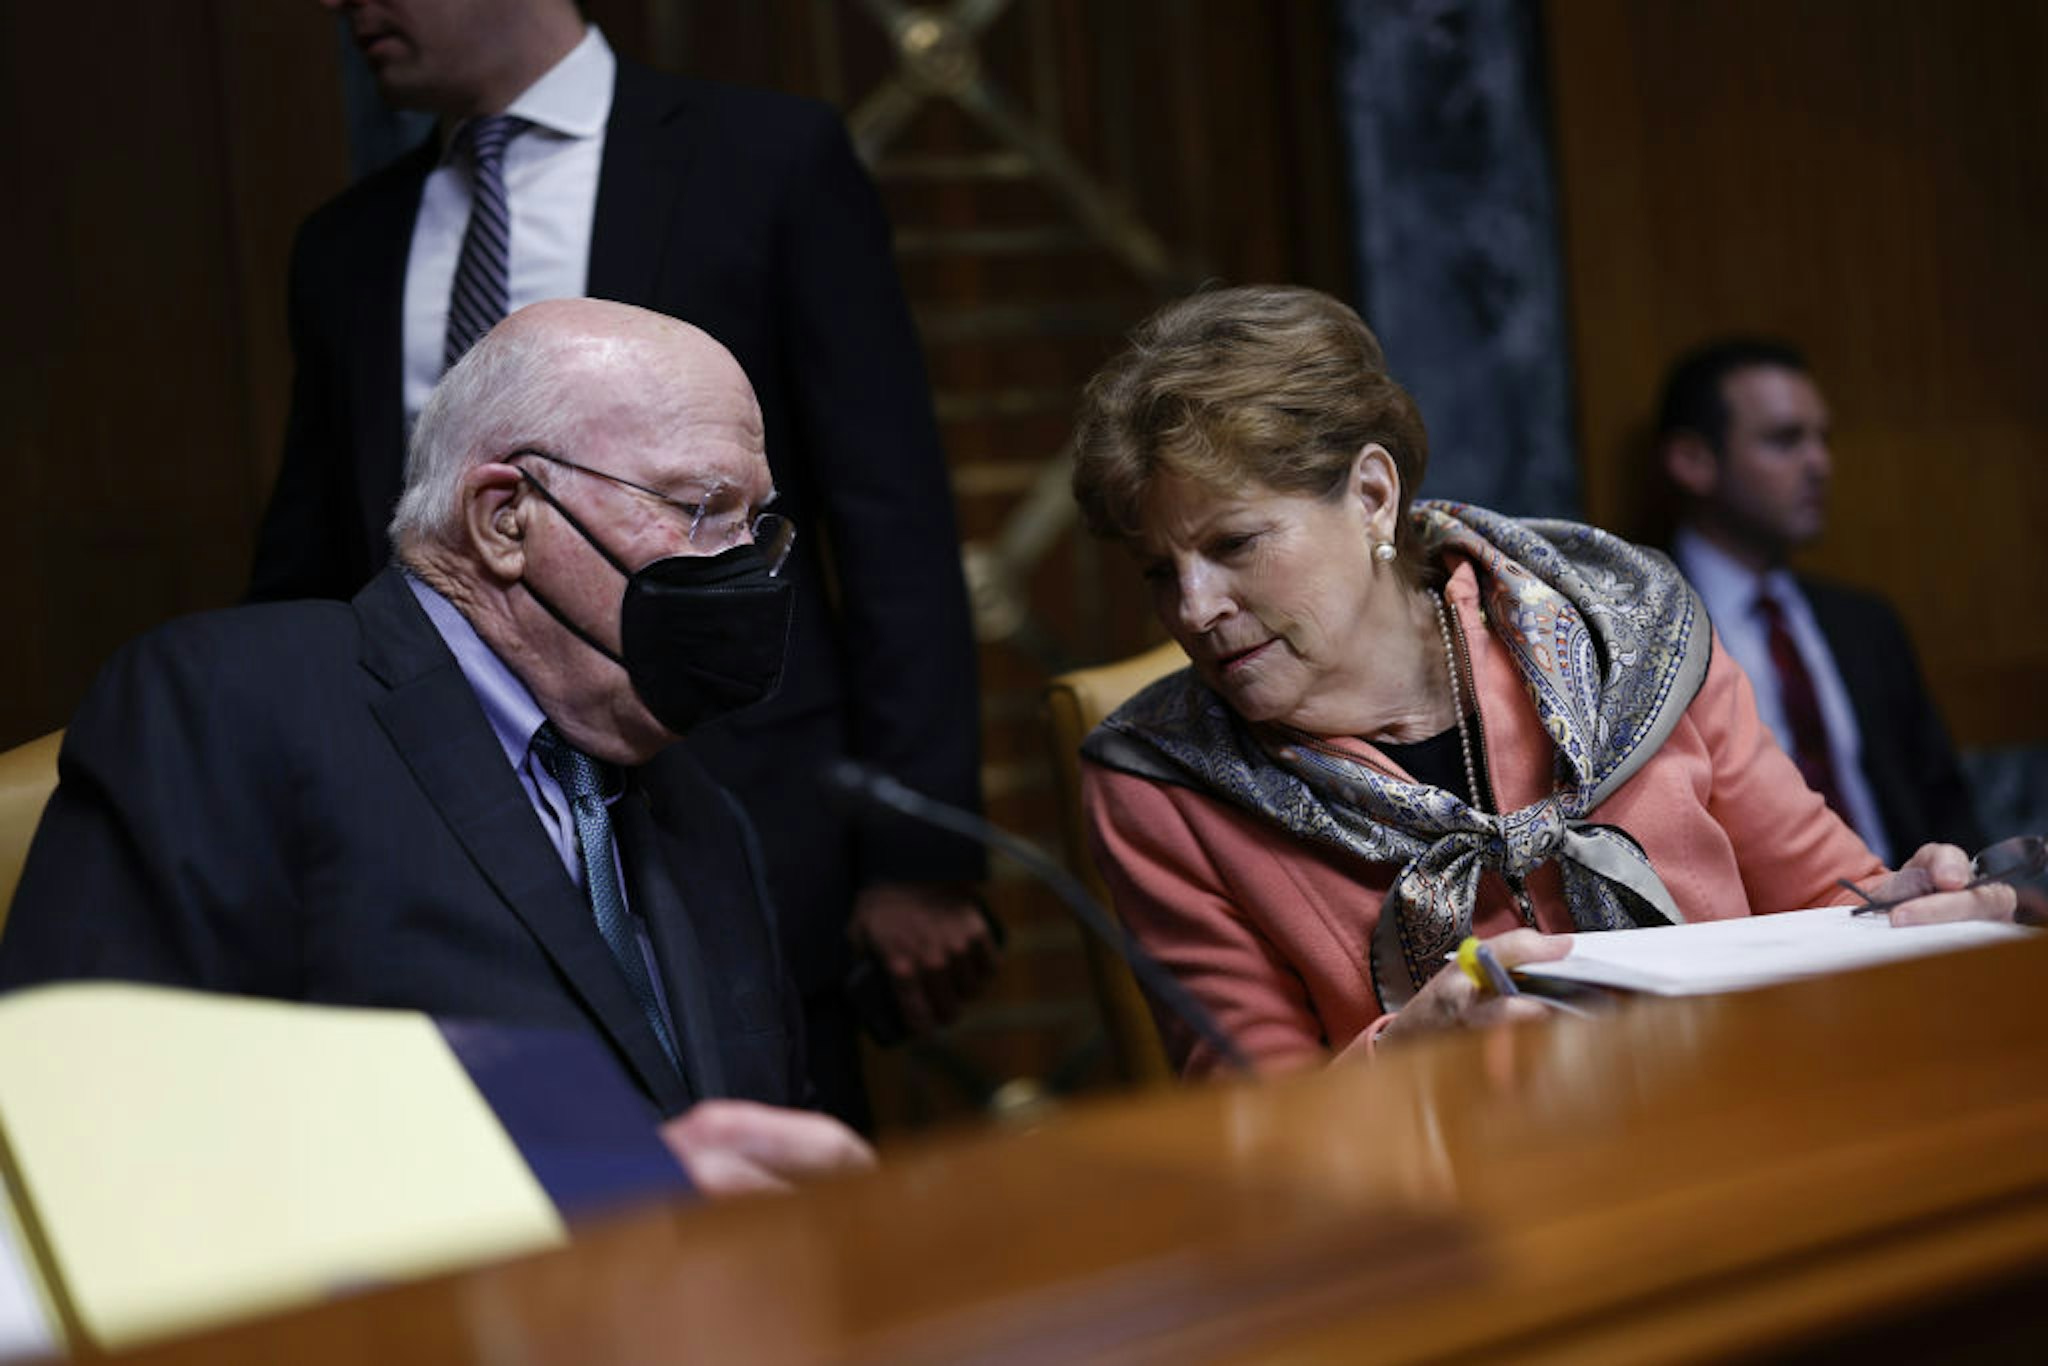 Senator Jeanne Shaheen, a Democrat from New Hampshire and chair of the Senate Appropriations Subcommittee on Commerce, Justice and Science, right, speaks with Senator Patrick Leahy, a Democrat from Vermont, during a hearing in Washington, D.C., US, on Wednesday, May 25, 2022. The hearing is titled "A Review of the President's Fiscal Year 2023 Funding Request for the Federal Bureau of Investigation."